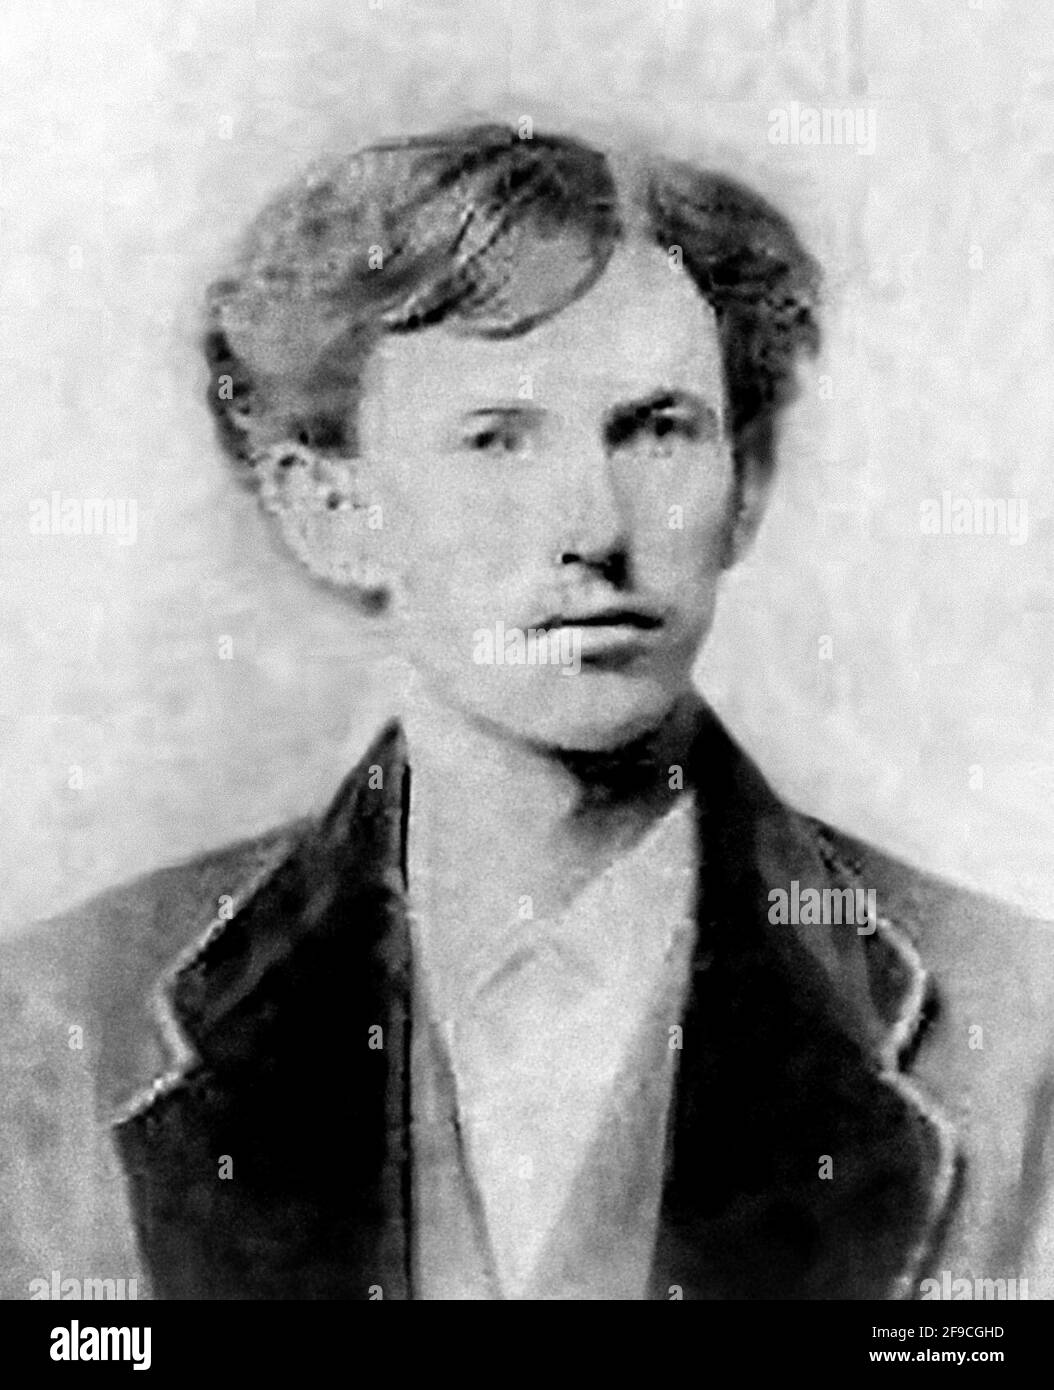 Doc Holliday. Portrait of the American gambler and gunfighter, John Henry 'Doc' Holliday ( 1851-1887), graduation photo from the Pennsylvania School of Dentistry, March 1872. This is one of only two authenticated photographs of Doc Holliday. Stock Photo